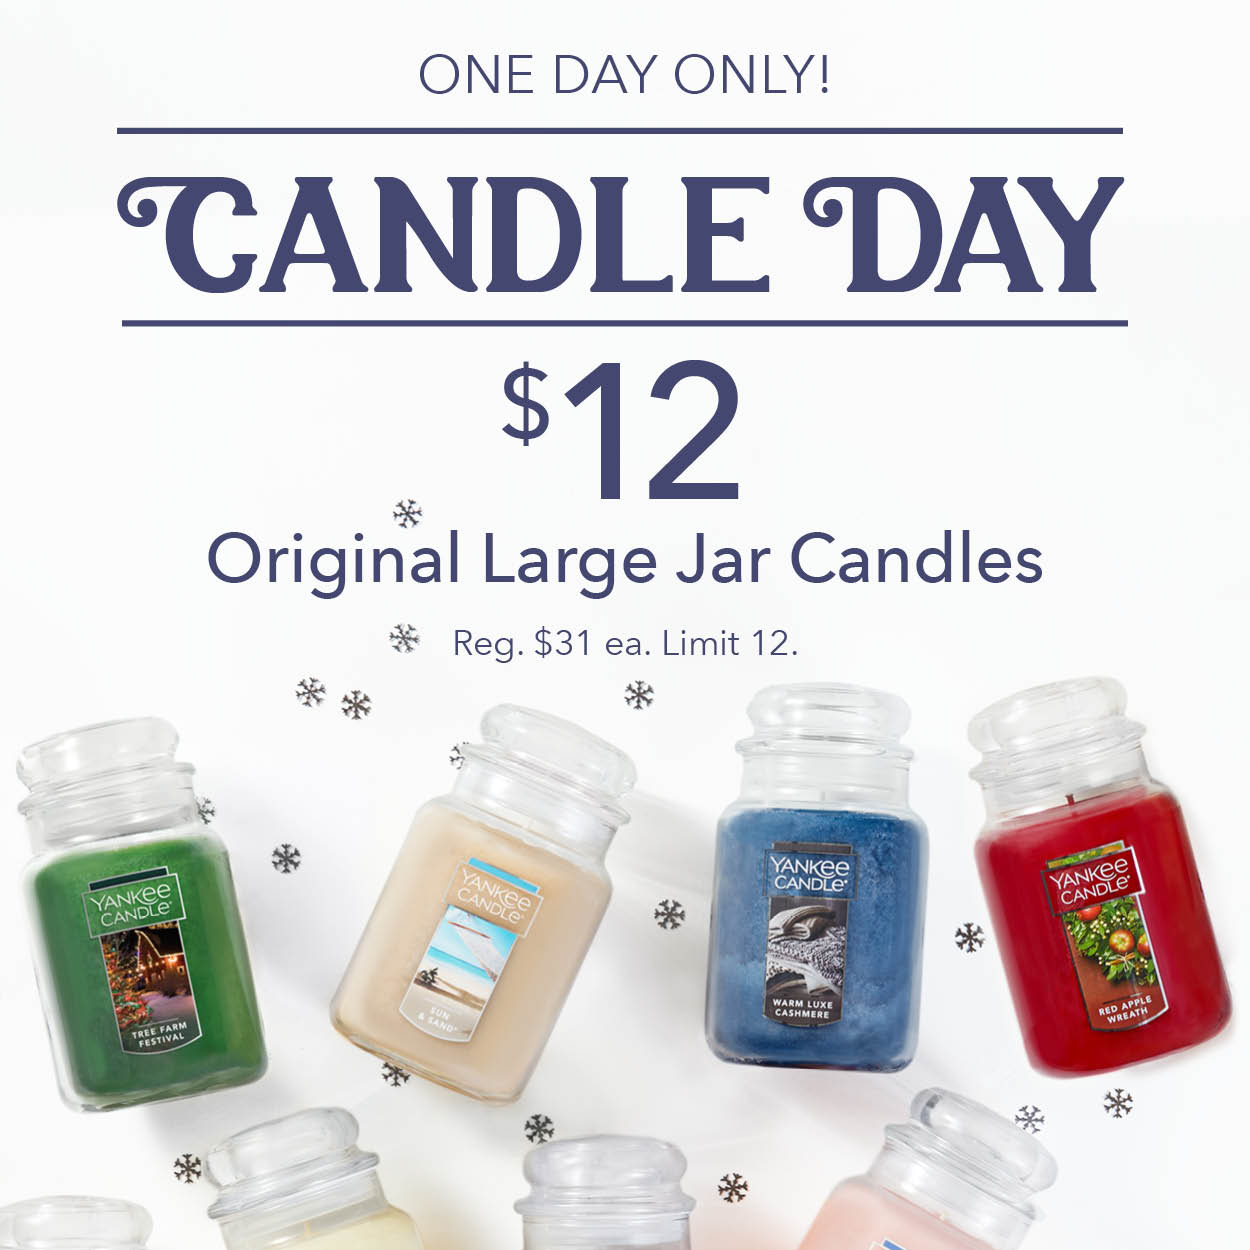 Candle Day at Yankee Candle from Yankee Candle